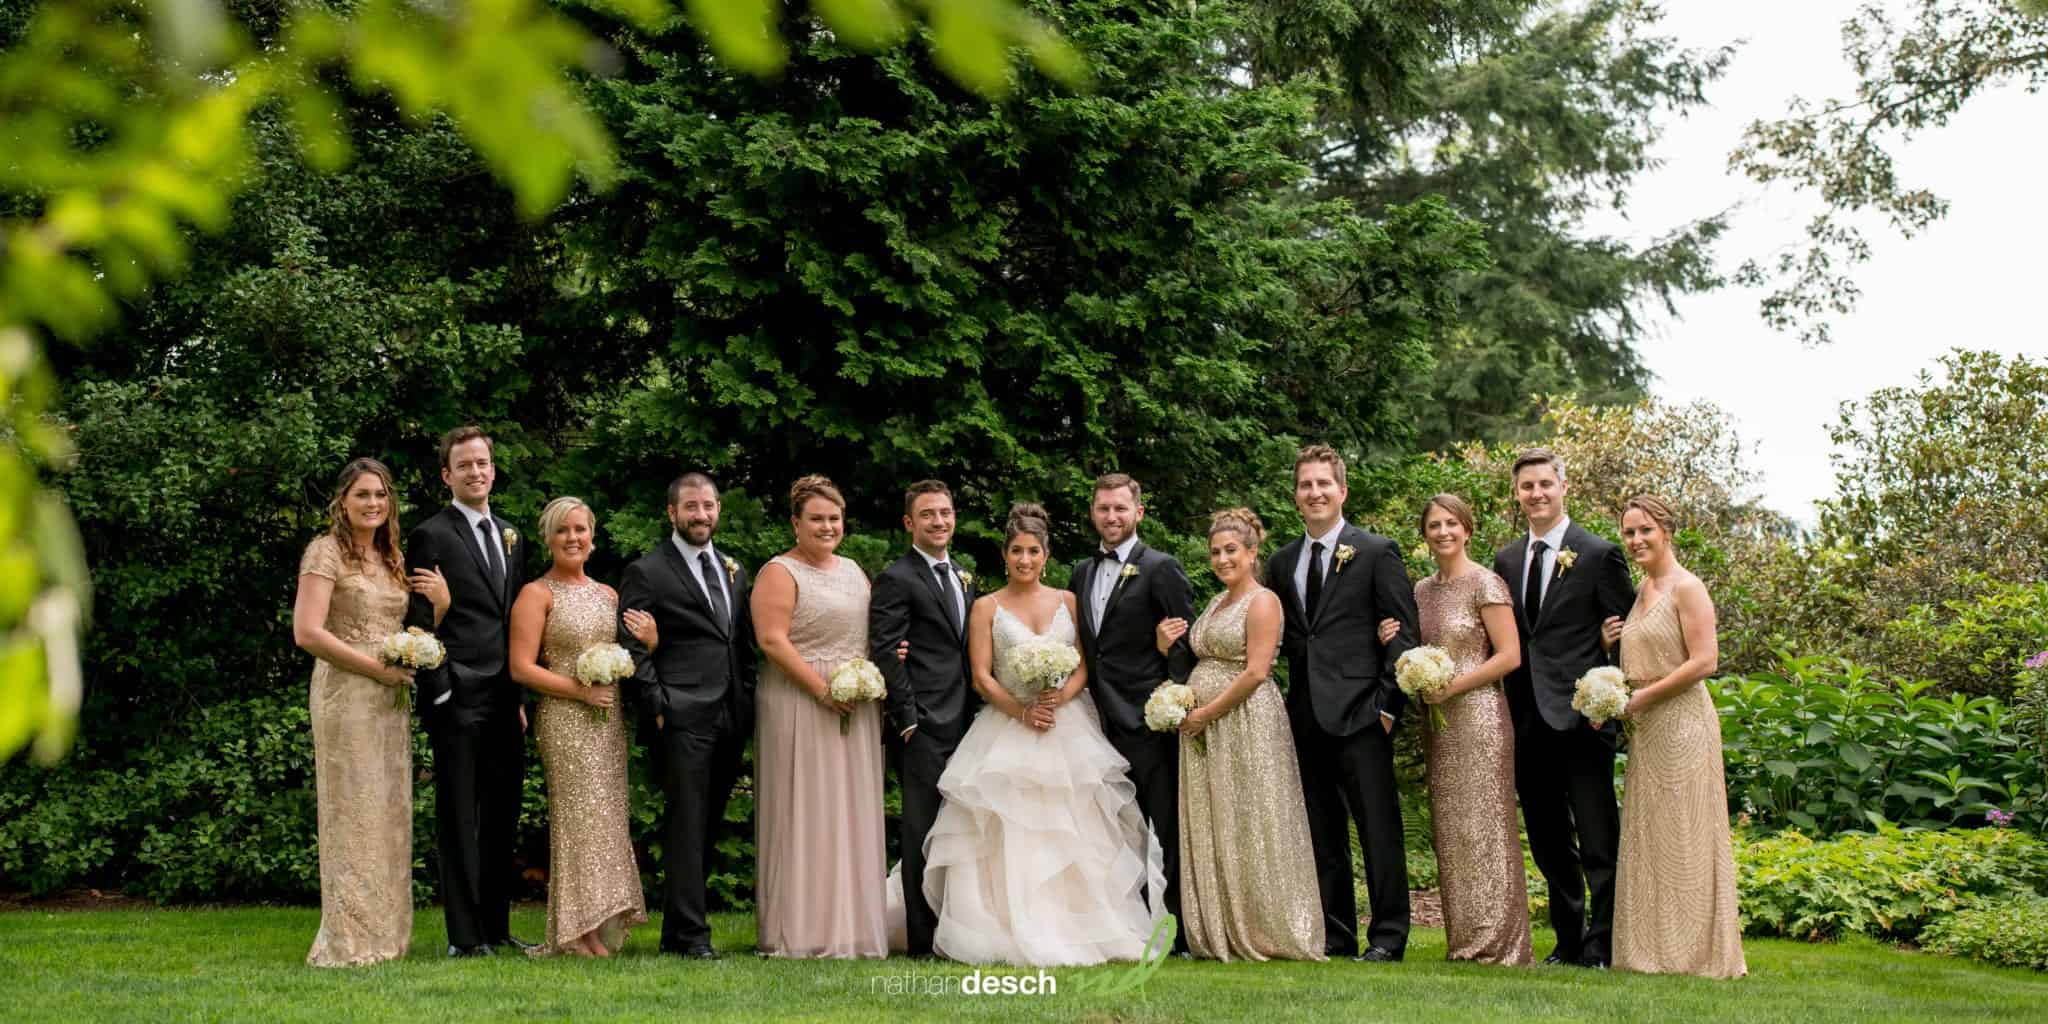 Top Wedding Pictures from 2018